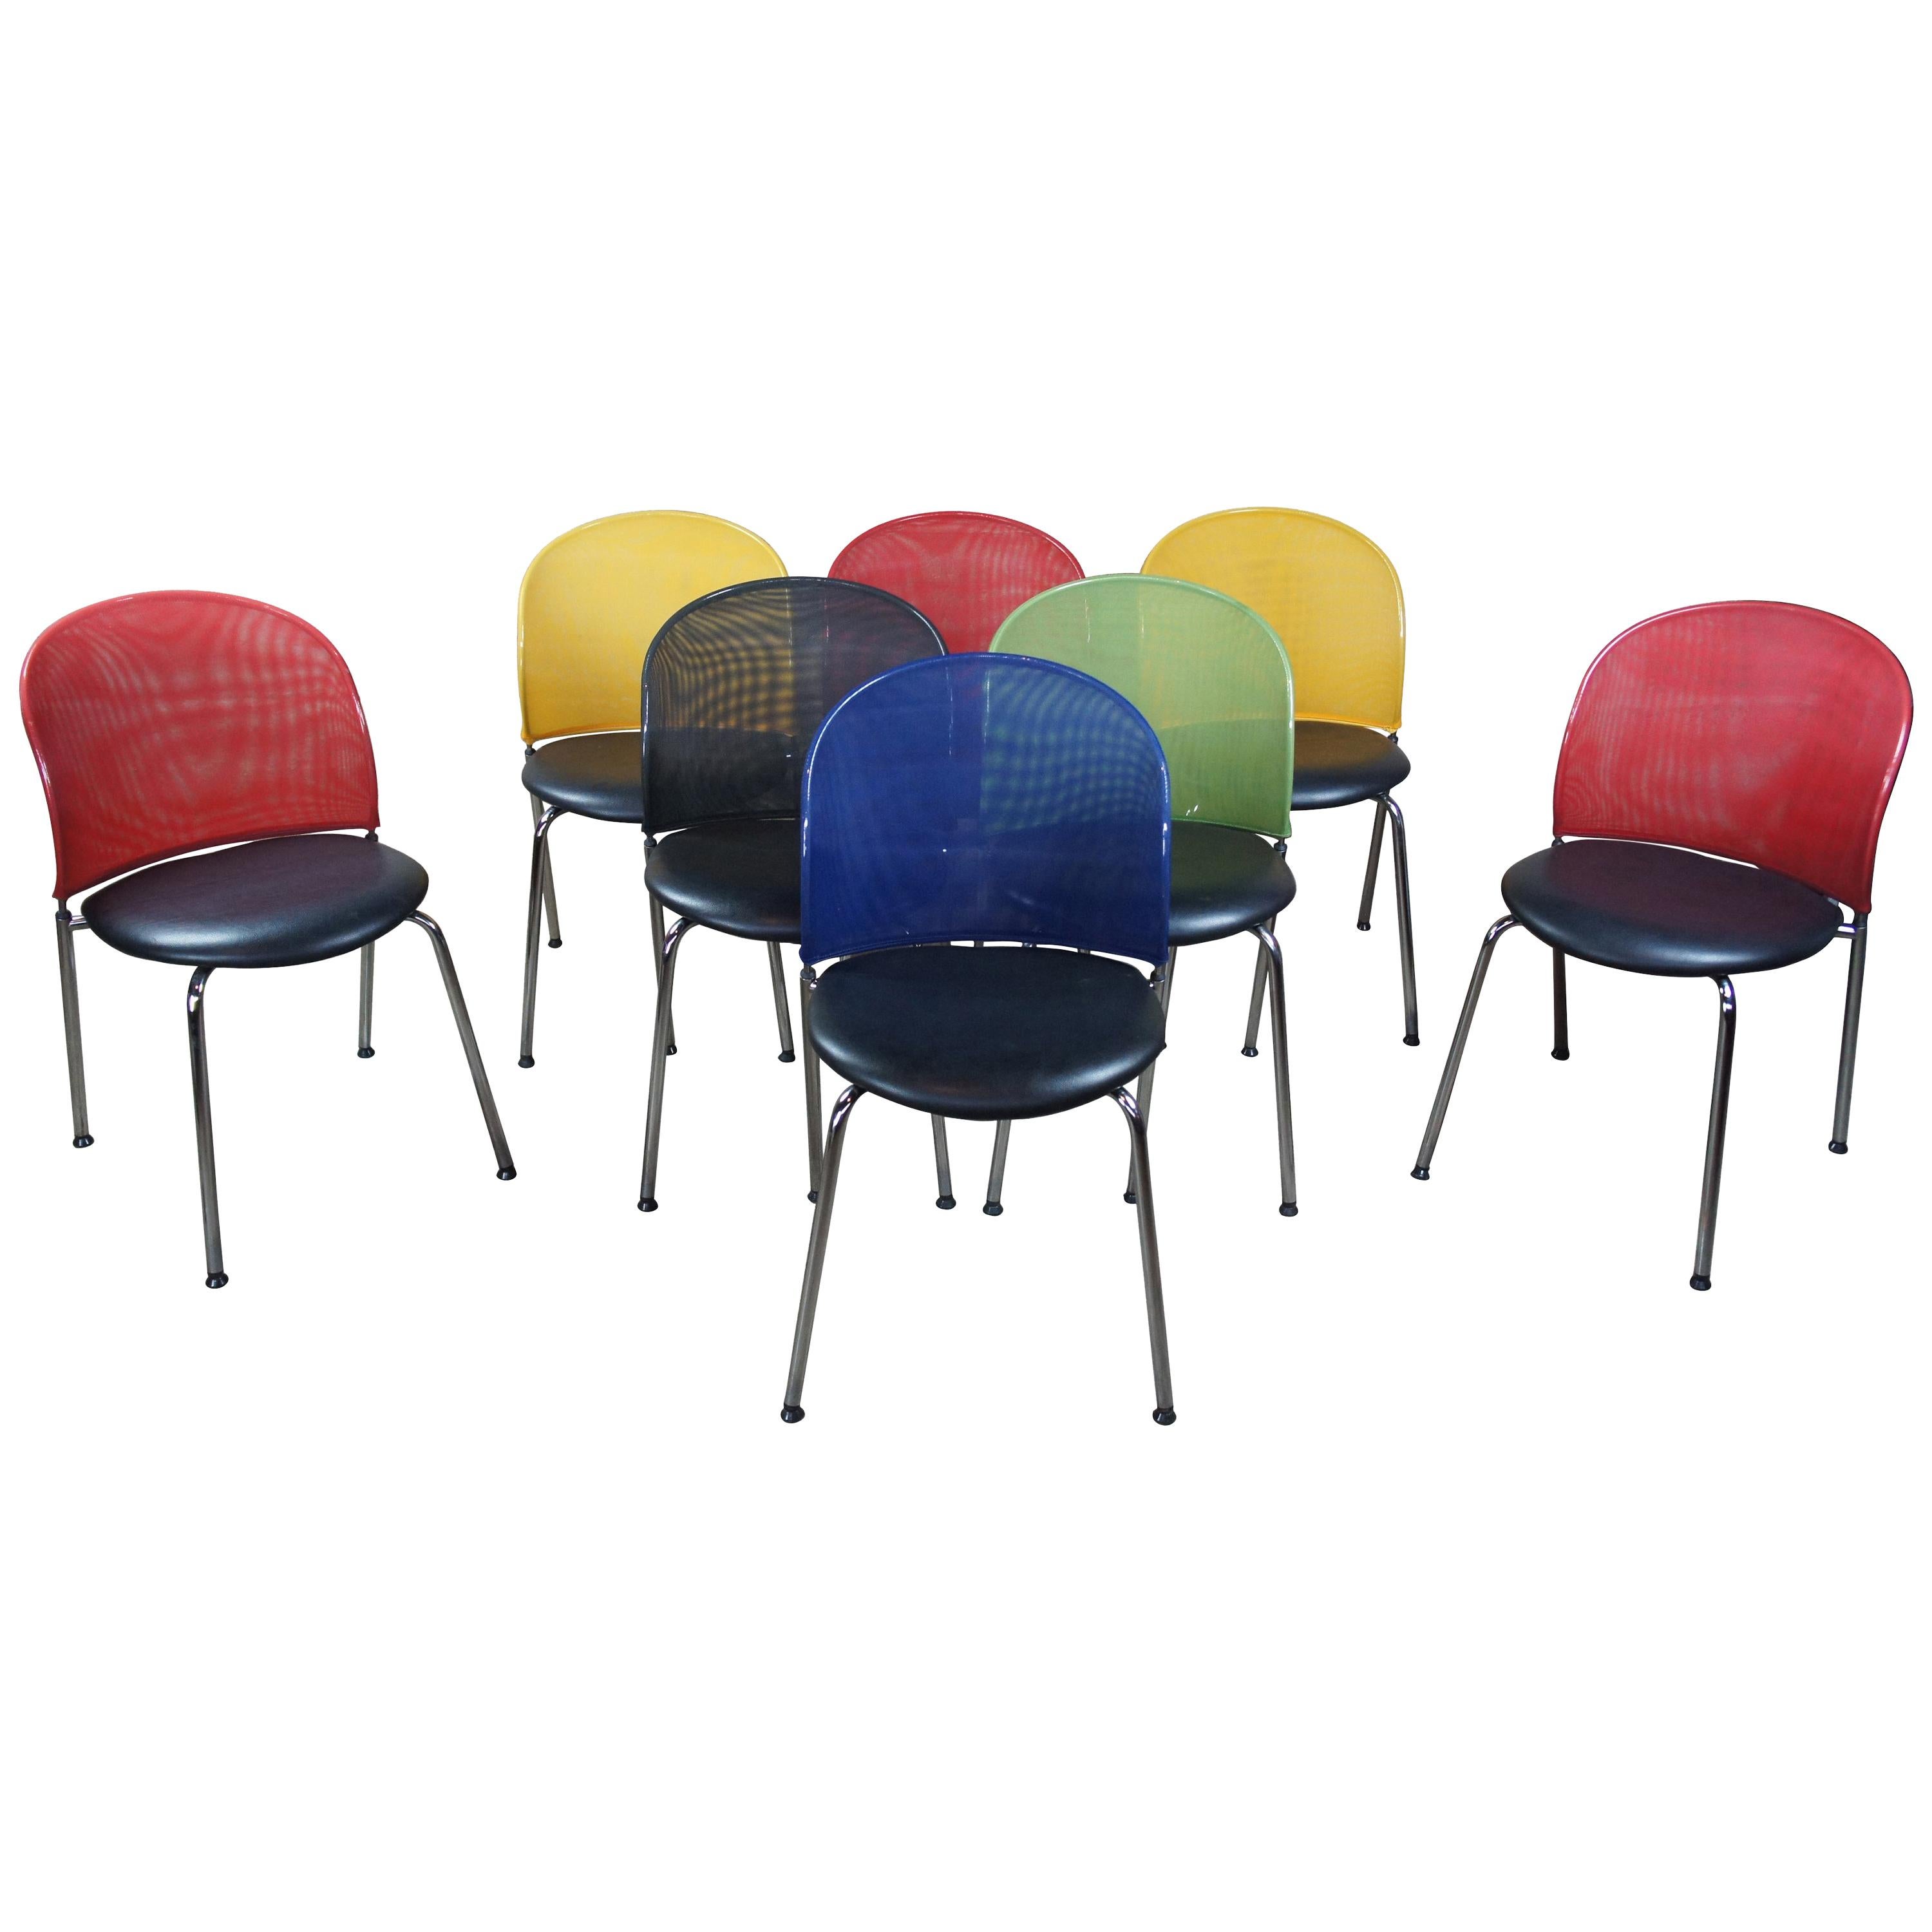 8 Christoph Hindermann Postmodern Orta Stacking Dining Office Chairs Dietiker